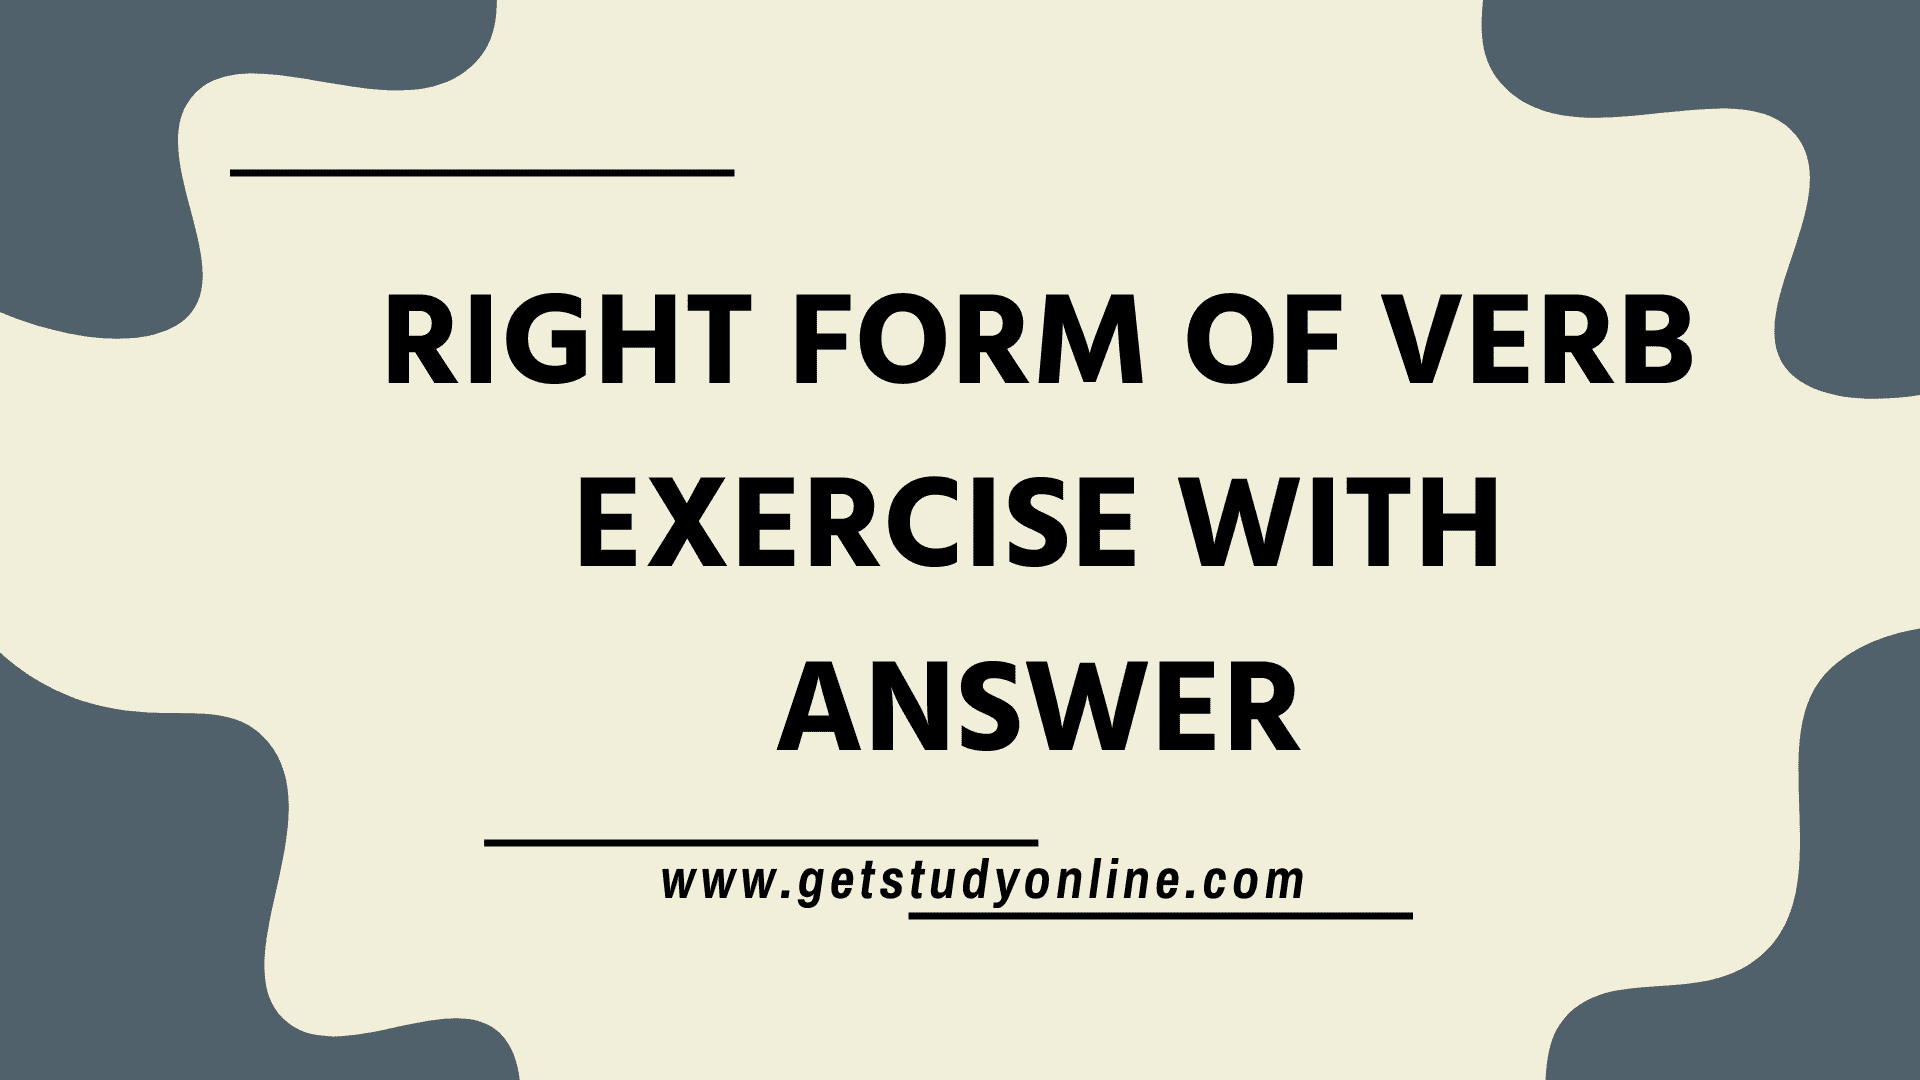 Right Form of Verb Exercise With Answer